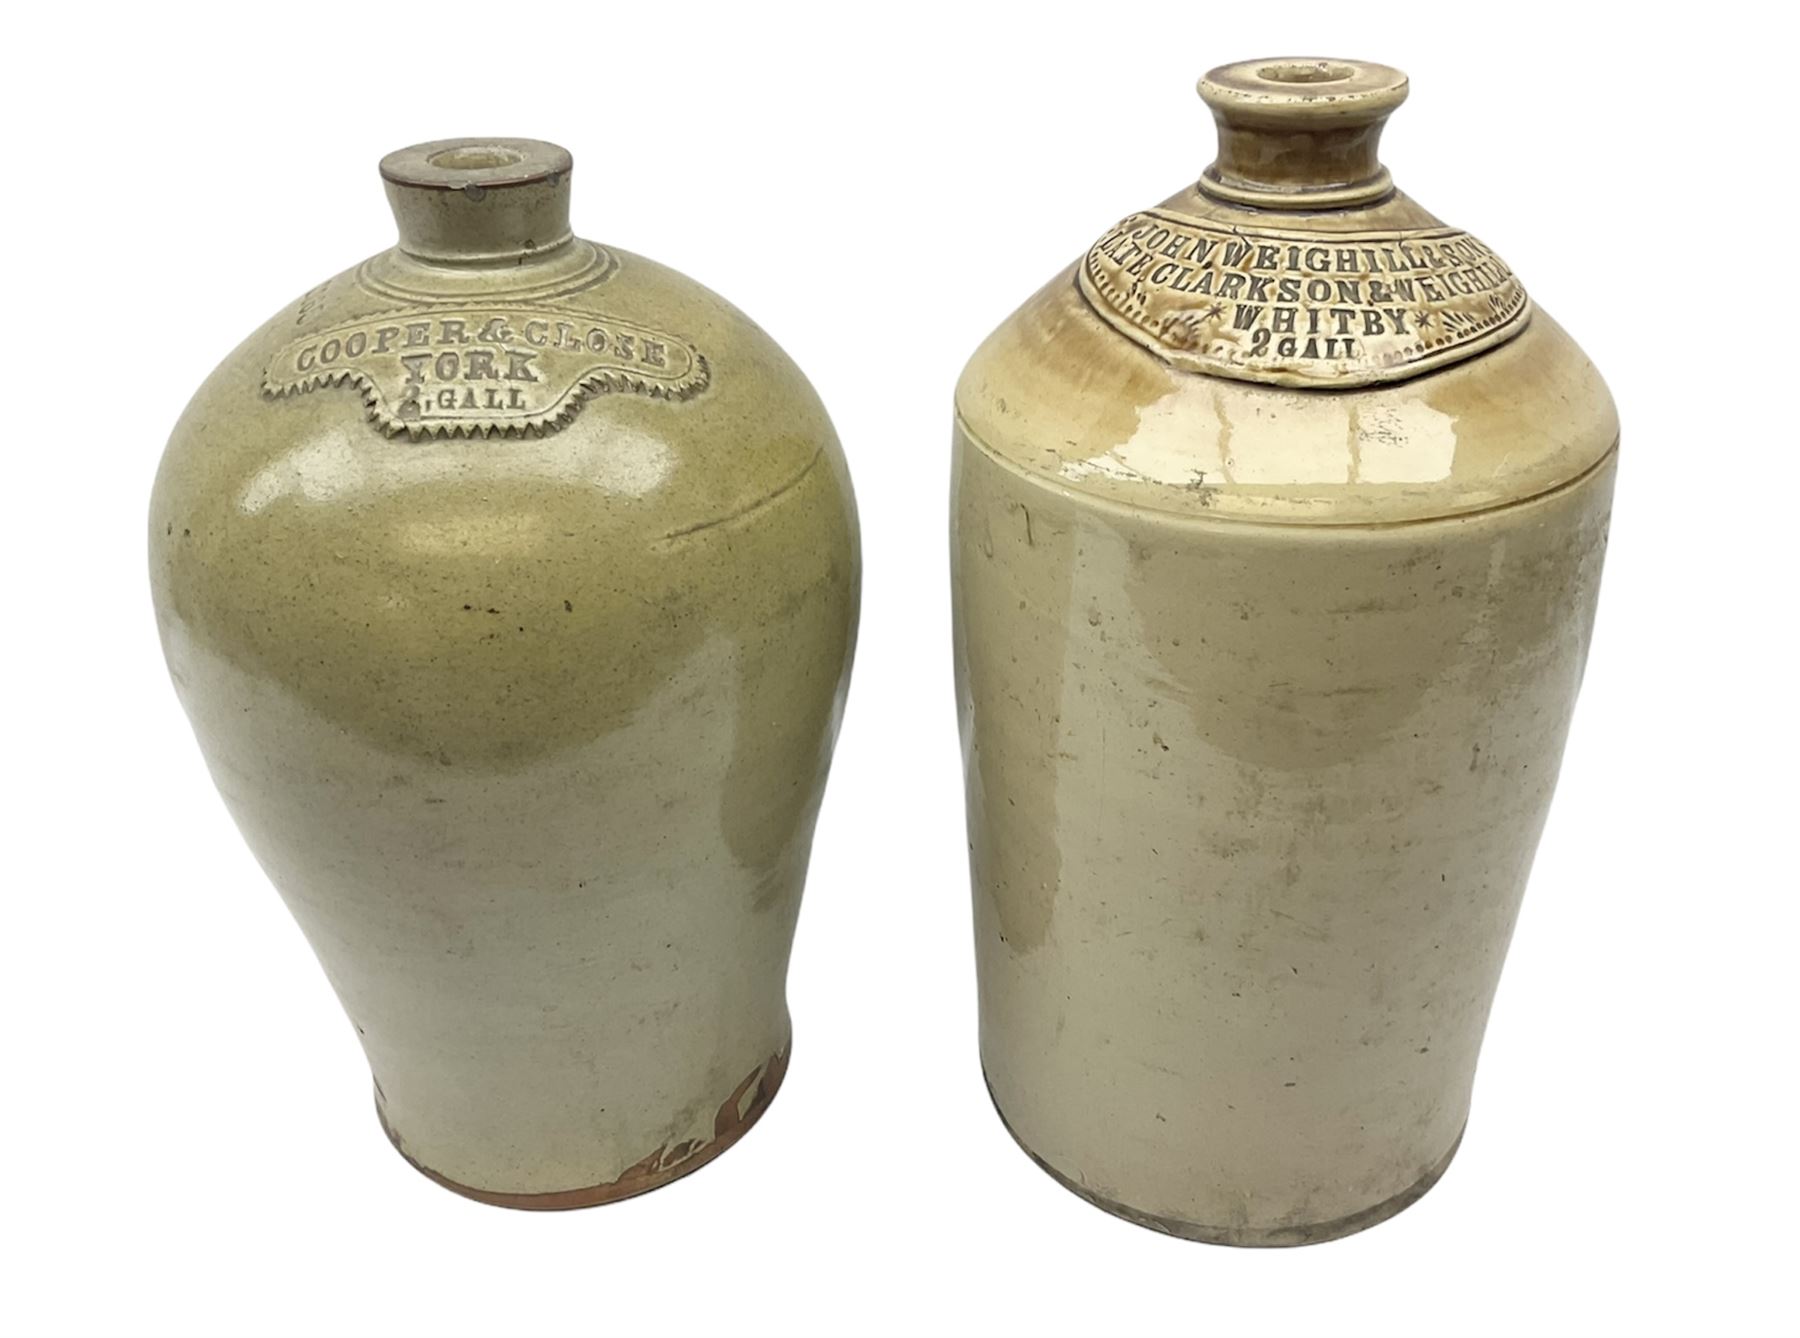 Two large 19th century stoneware bottles or flagons